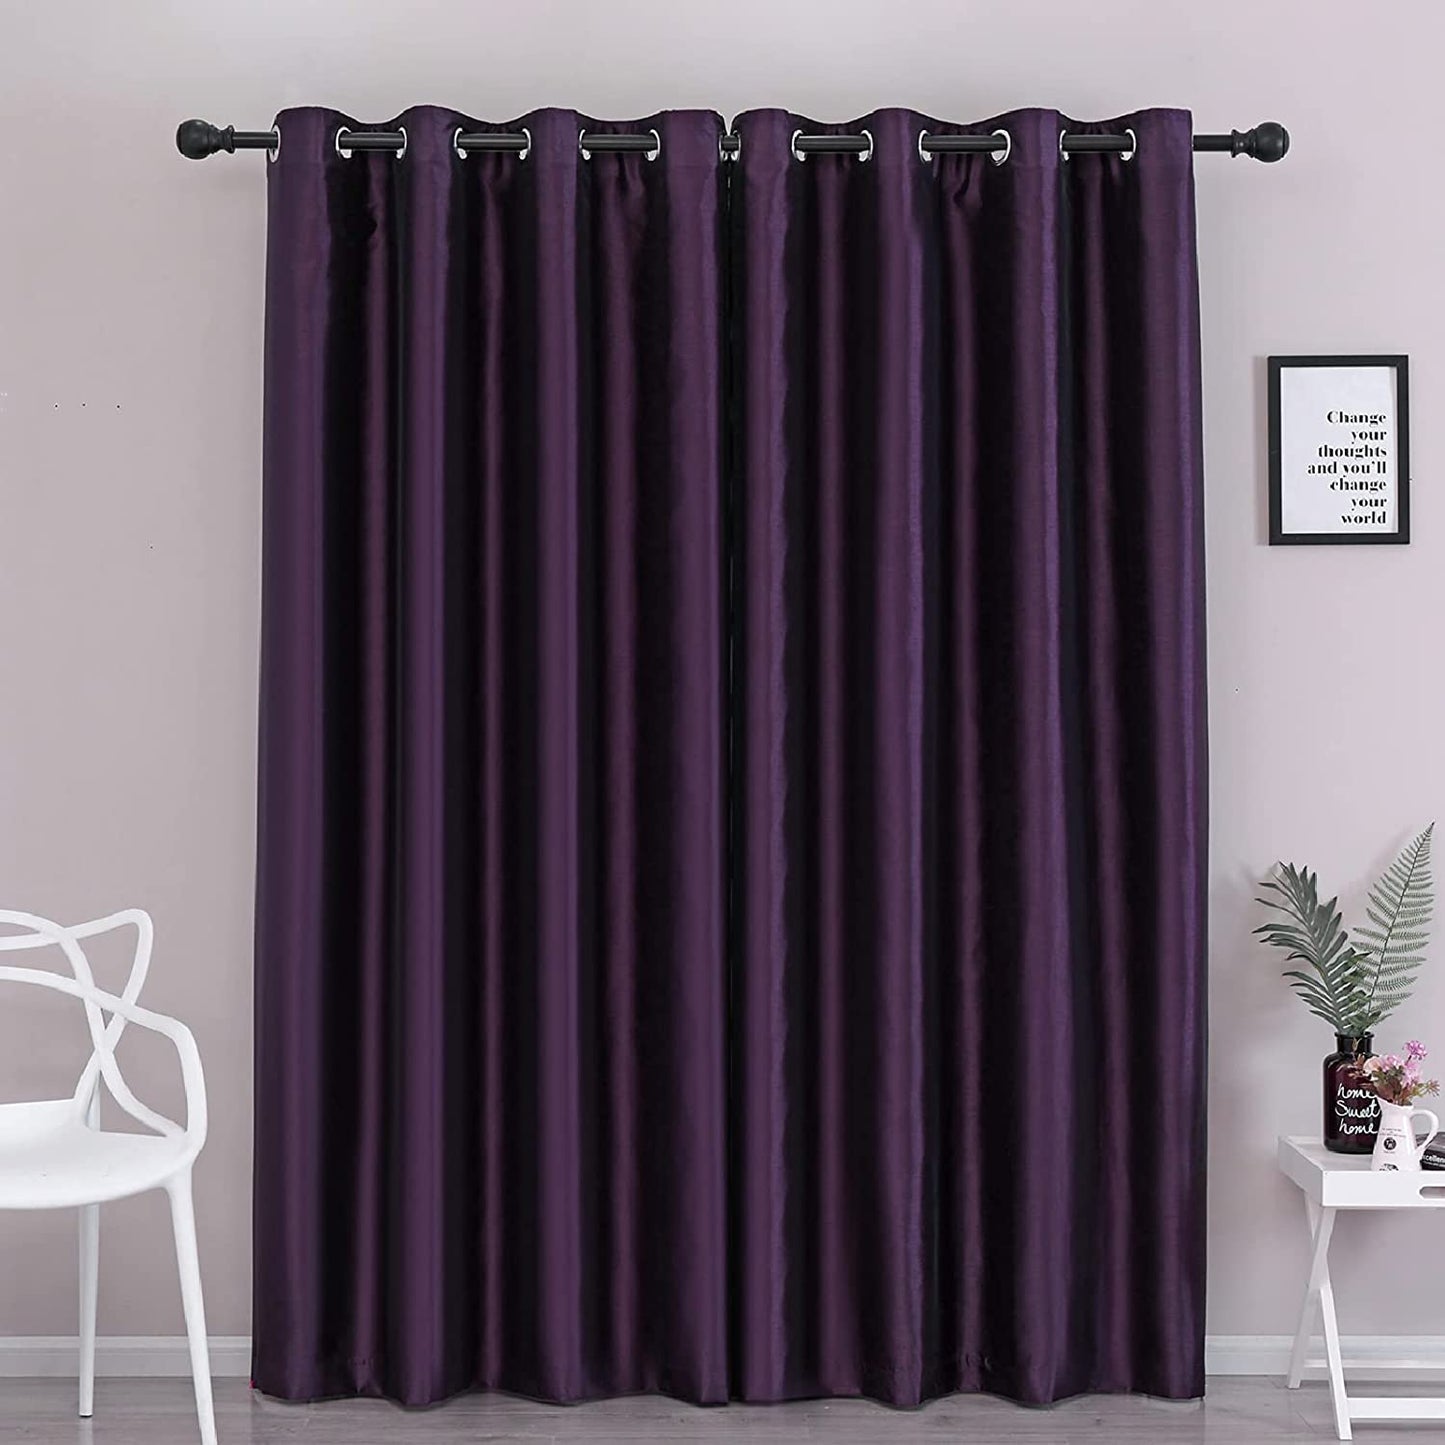 Purple Faux Silk Blackout Curtains,Fully Lined Solid Color Window Treatment Drapes